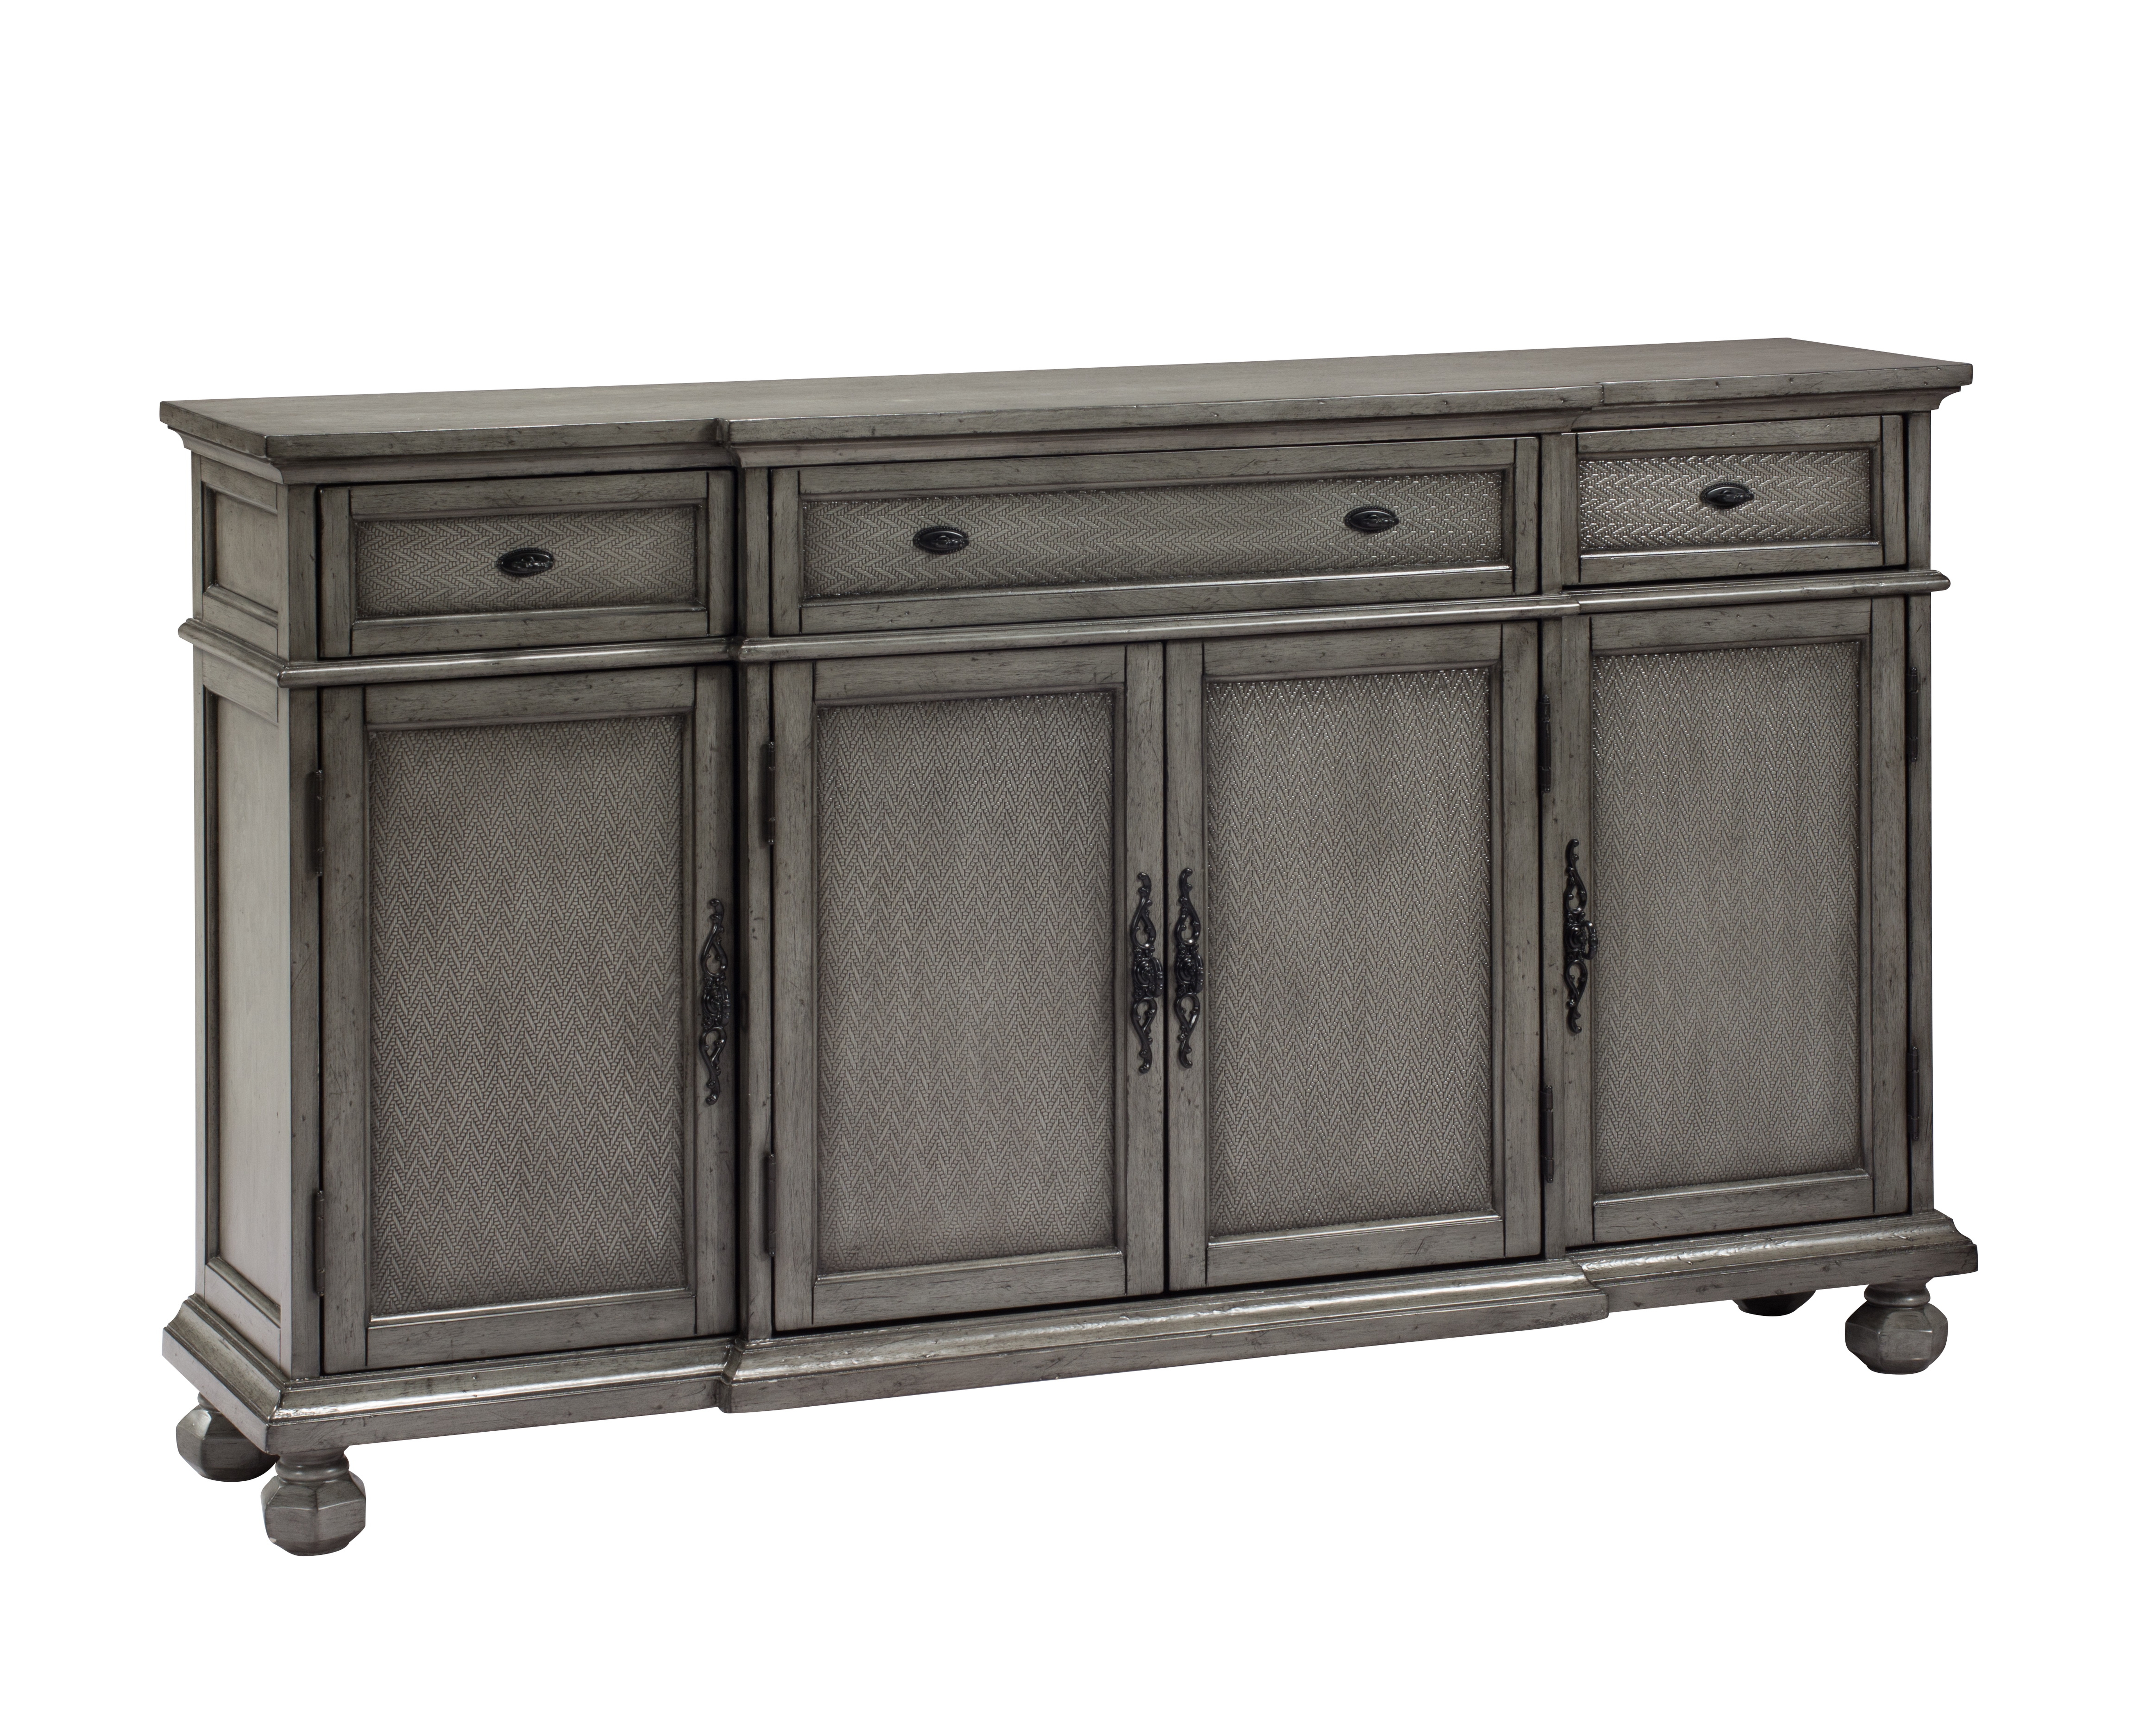 Three Drawer Four Door Credenza - Kino Burnished Grey - Sycamore Home